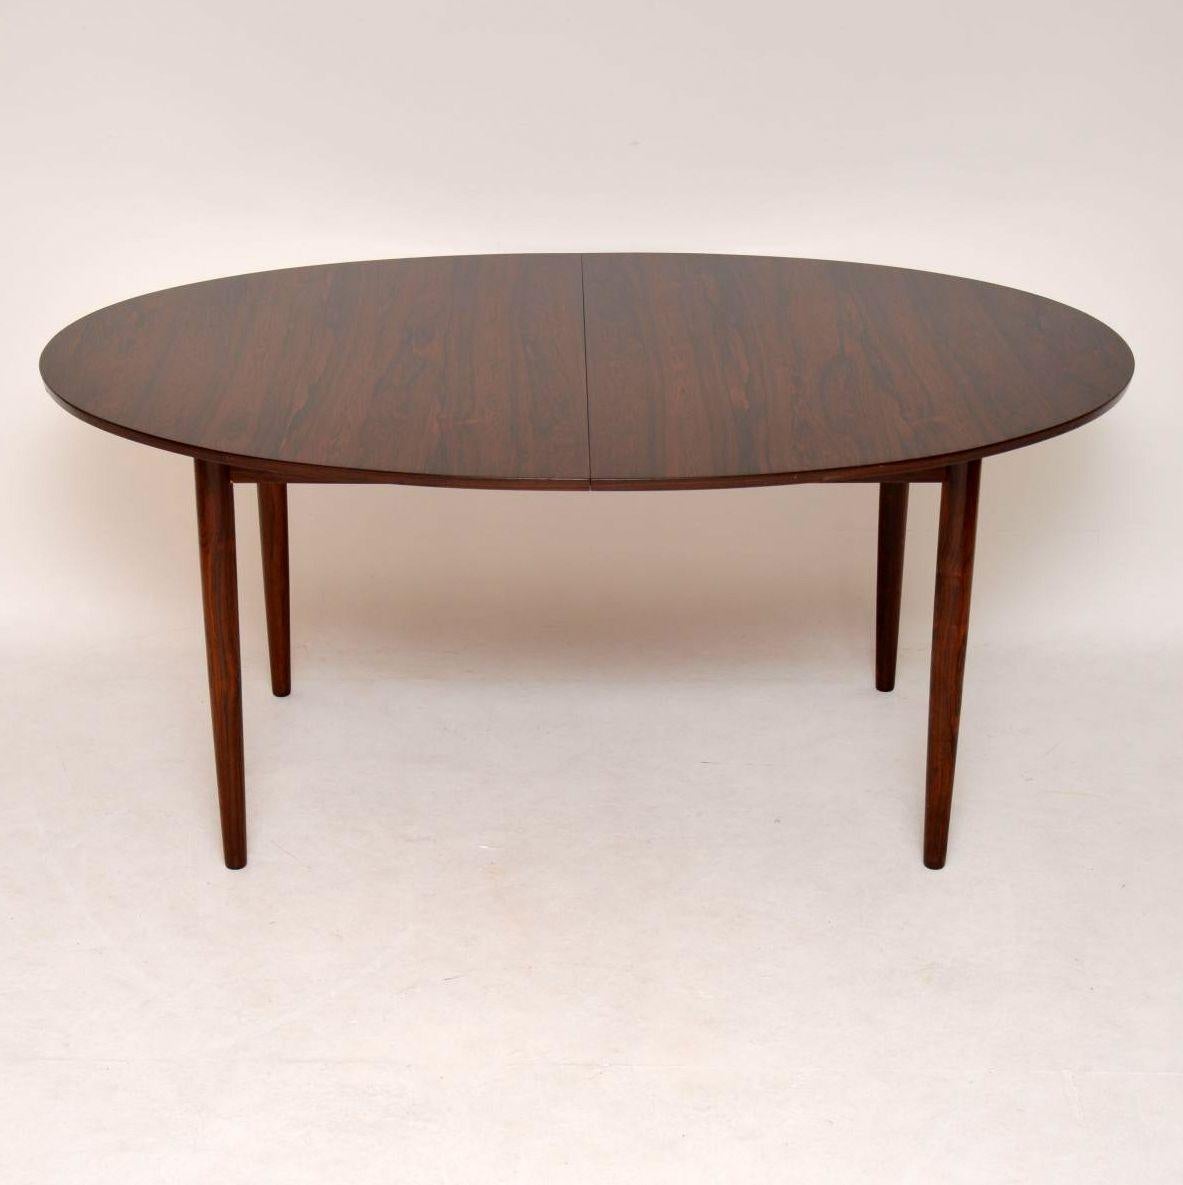 An extremely rare and beautifully made Danish dining table, designed by one of the great pioneers of Danish modern design, Finn Juhl. This was made in Denmark in the 1960s by the master cabinet maker Niels Vodder. It was bought from new by the